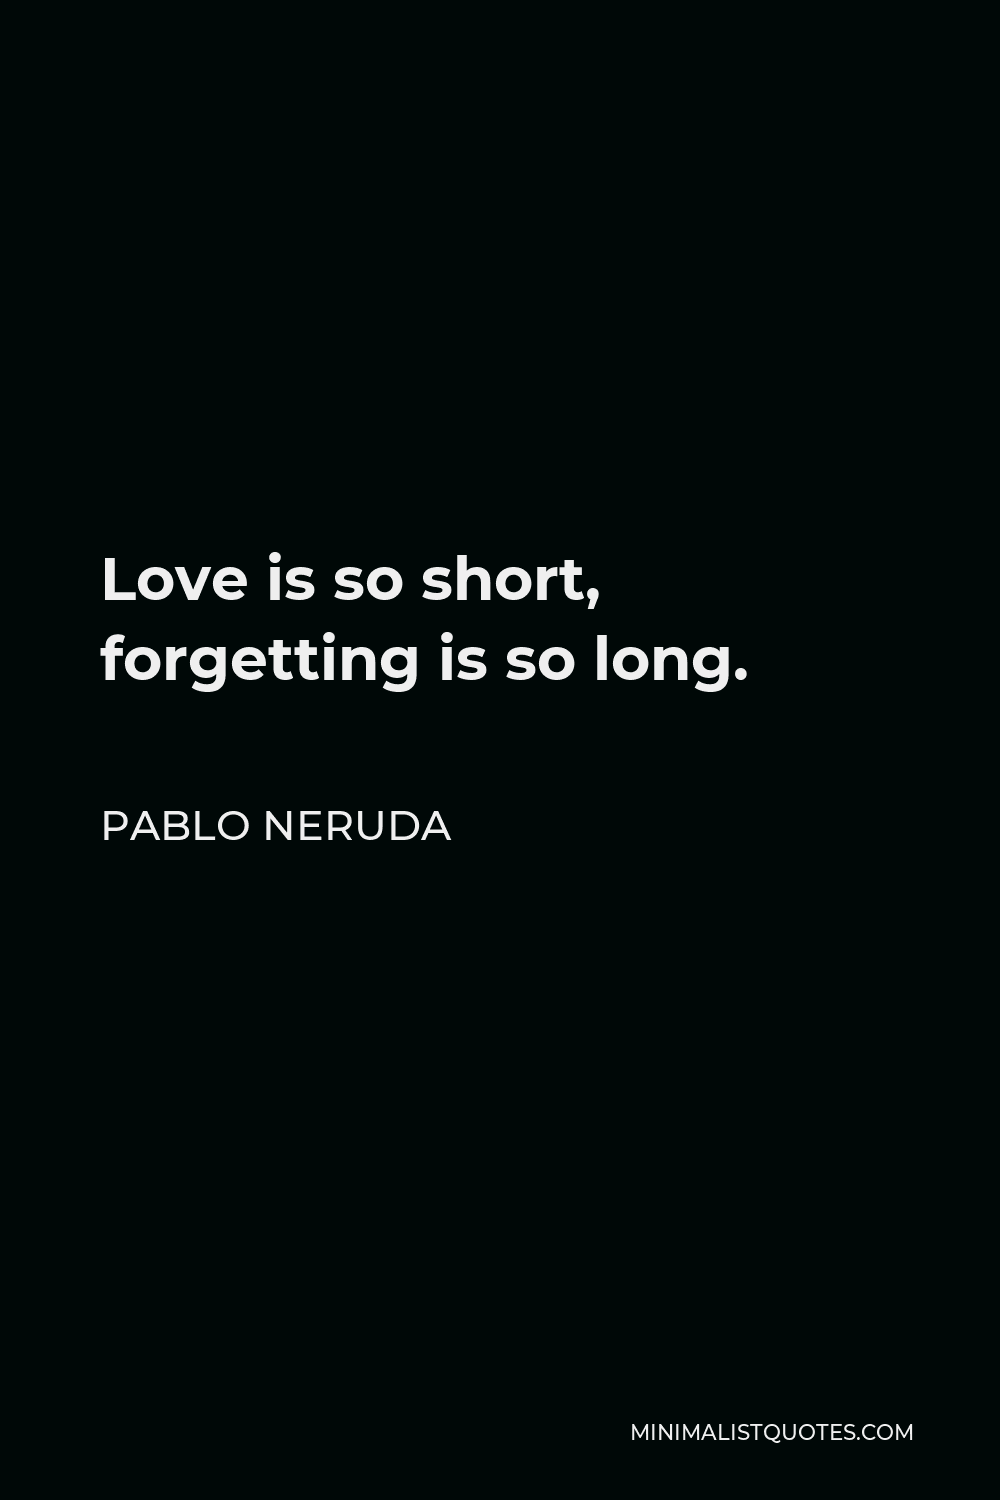 Pablo Neruda Quote: Love is so short, forgetting is so long.